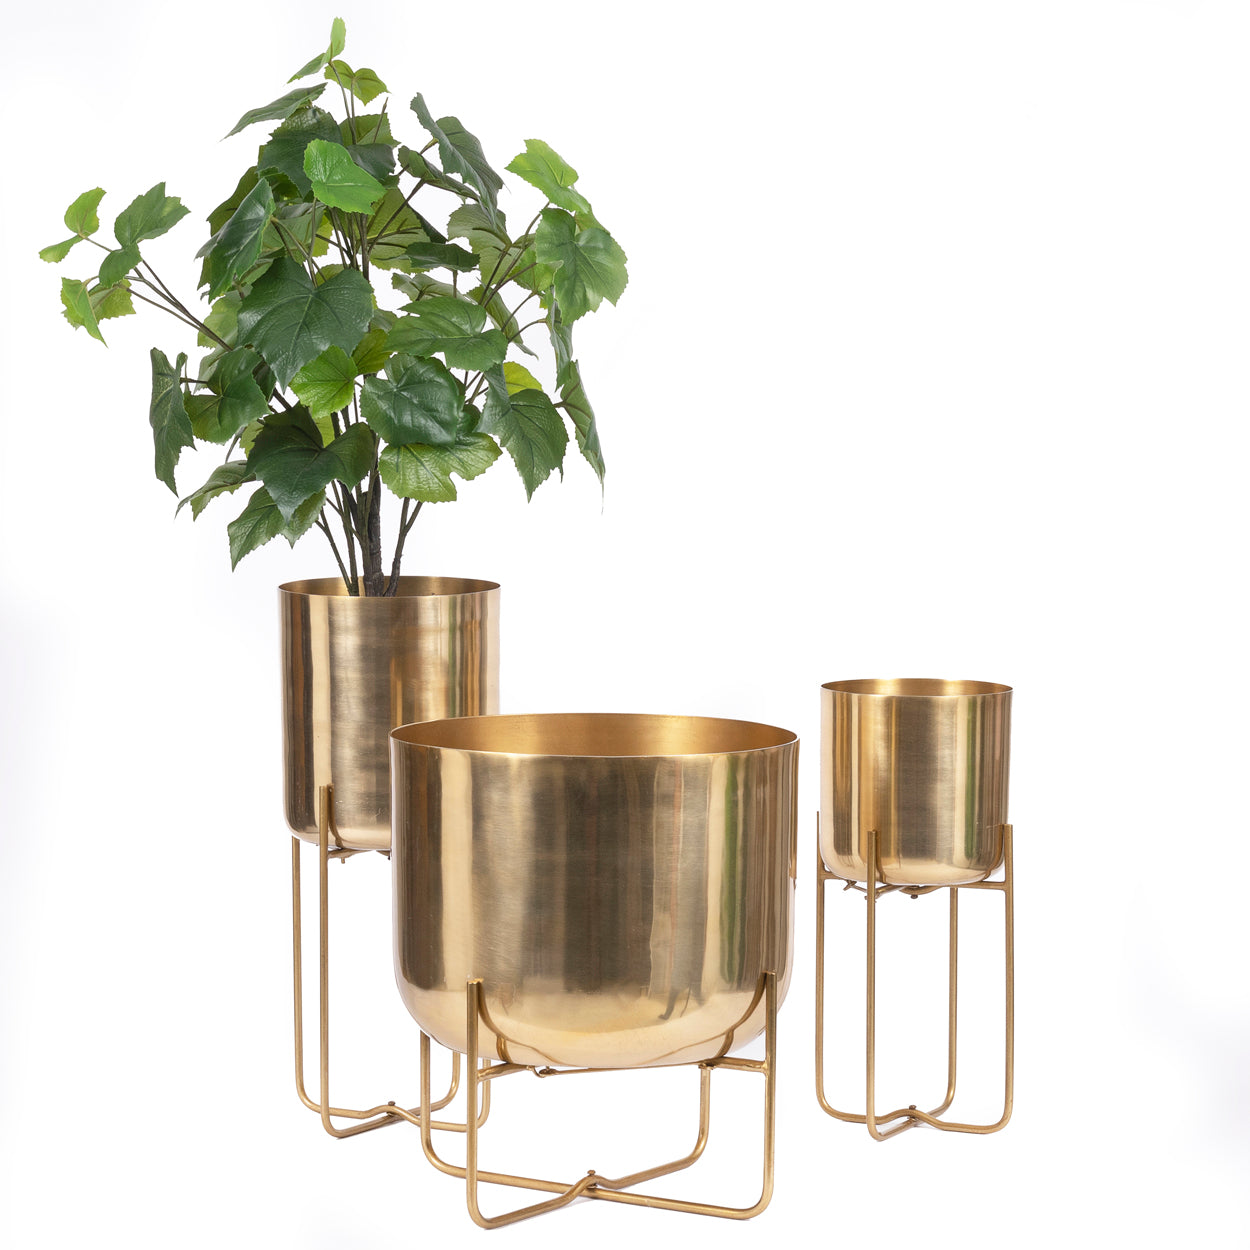 THE BRASS Planter On Stand three pieces with a plant